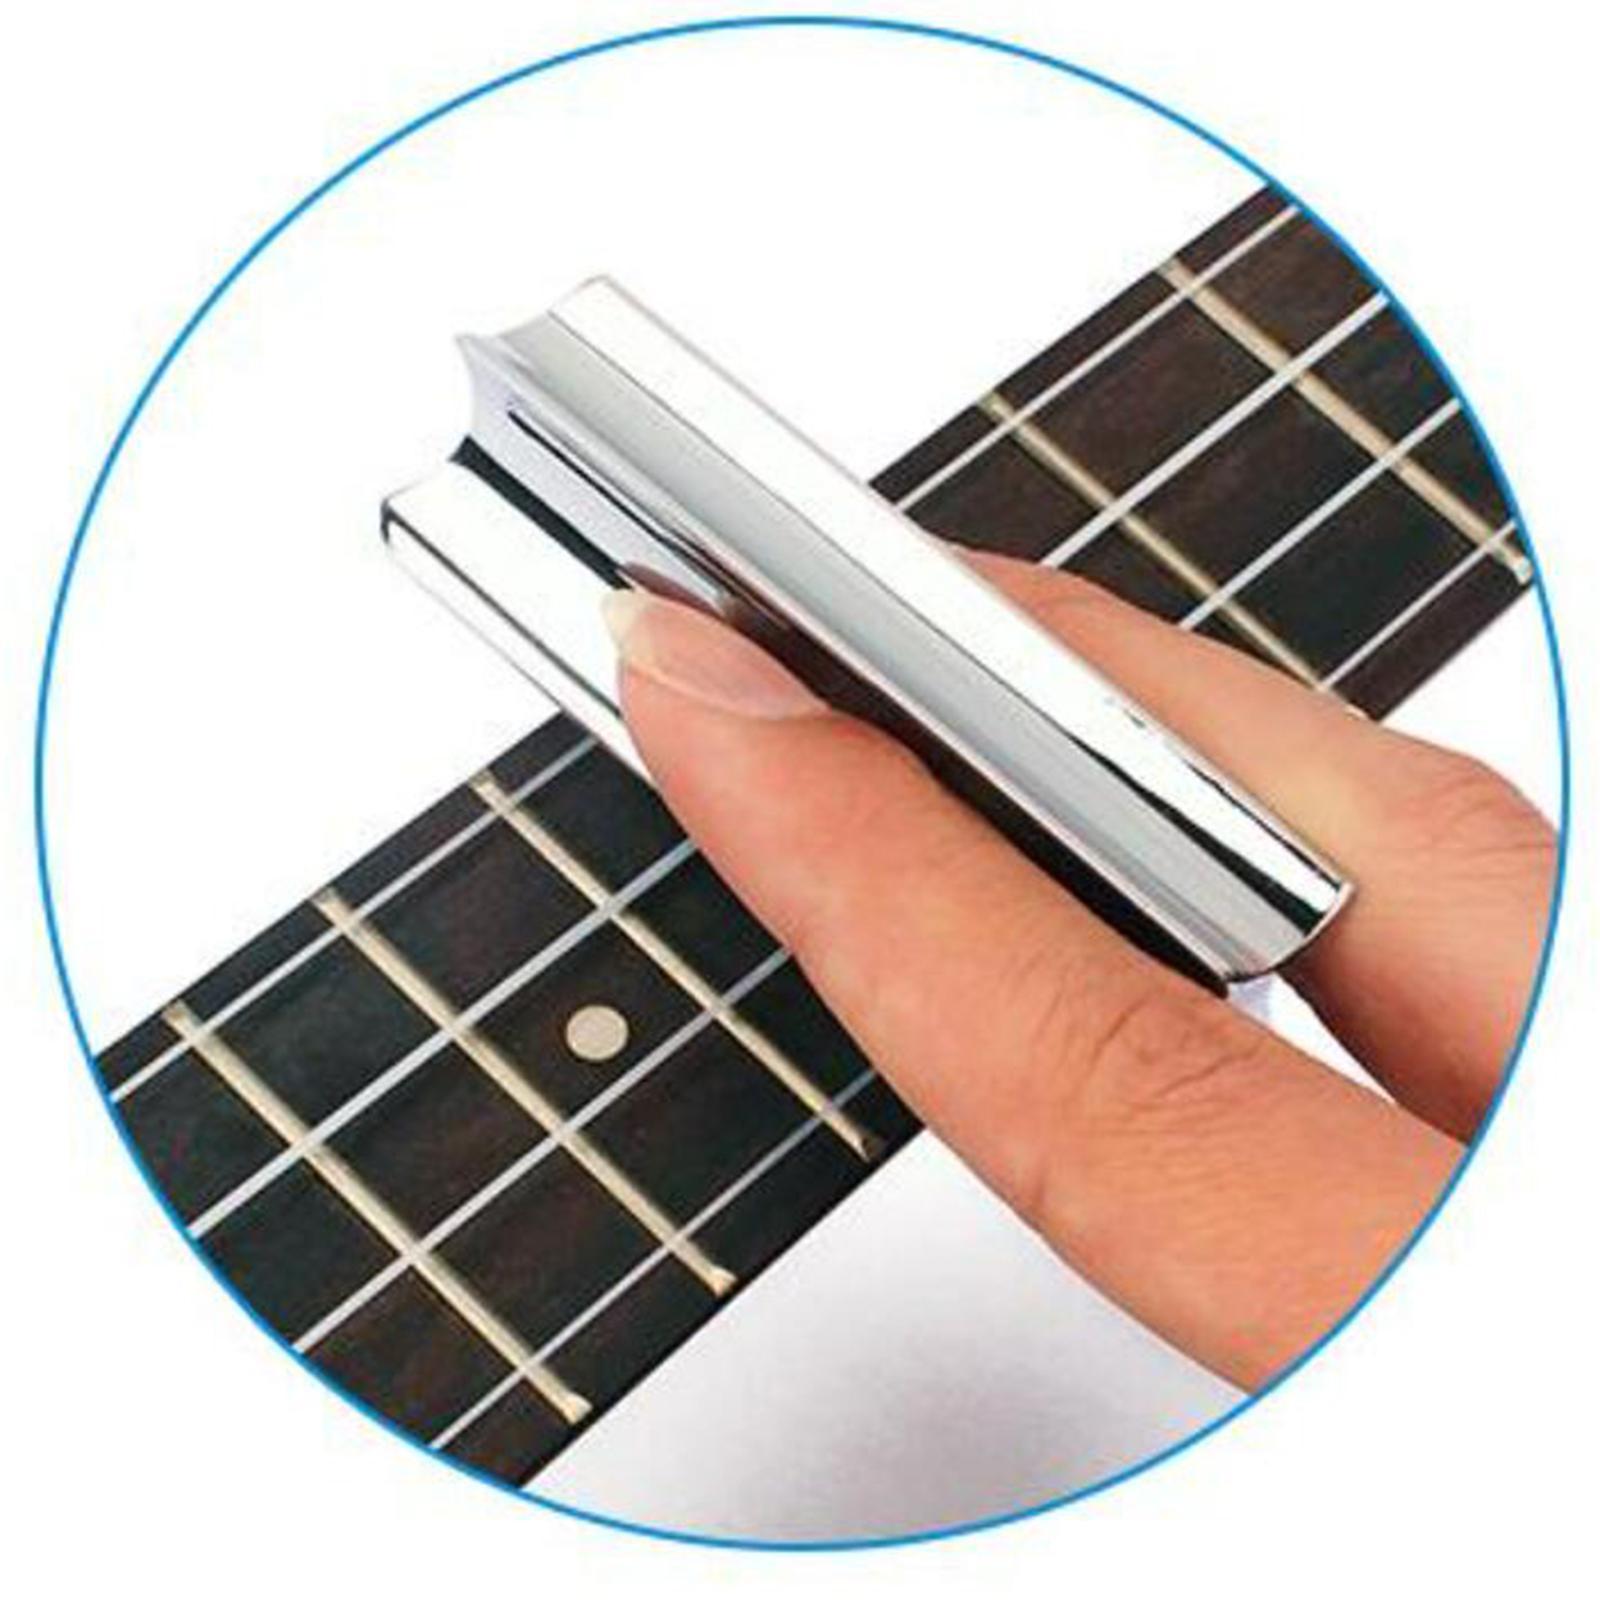 Stainless Steel Guitar Slide Bar Replace Parts for Acoustic Holiday Gifts